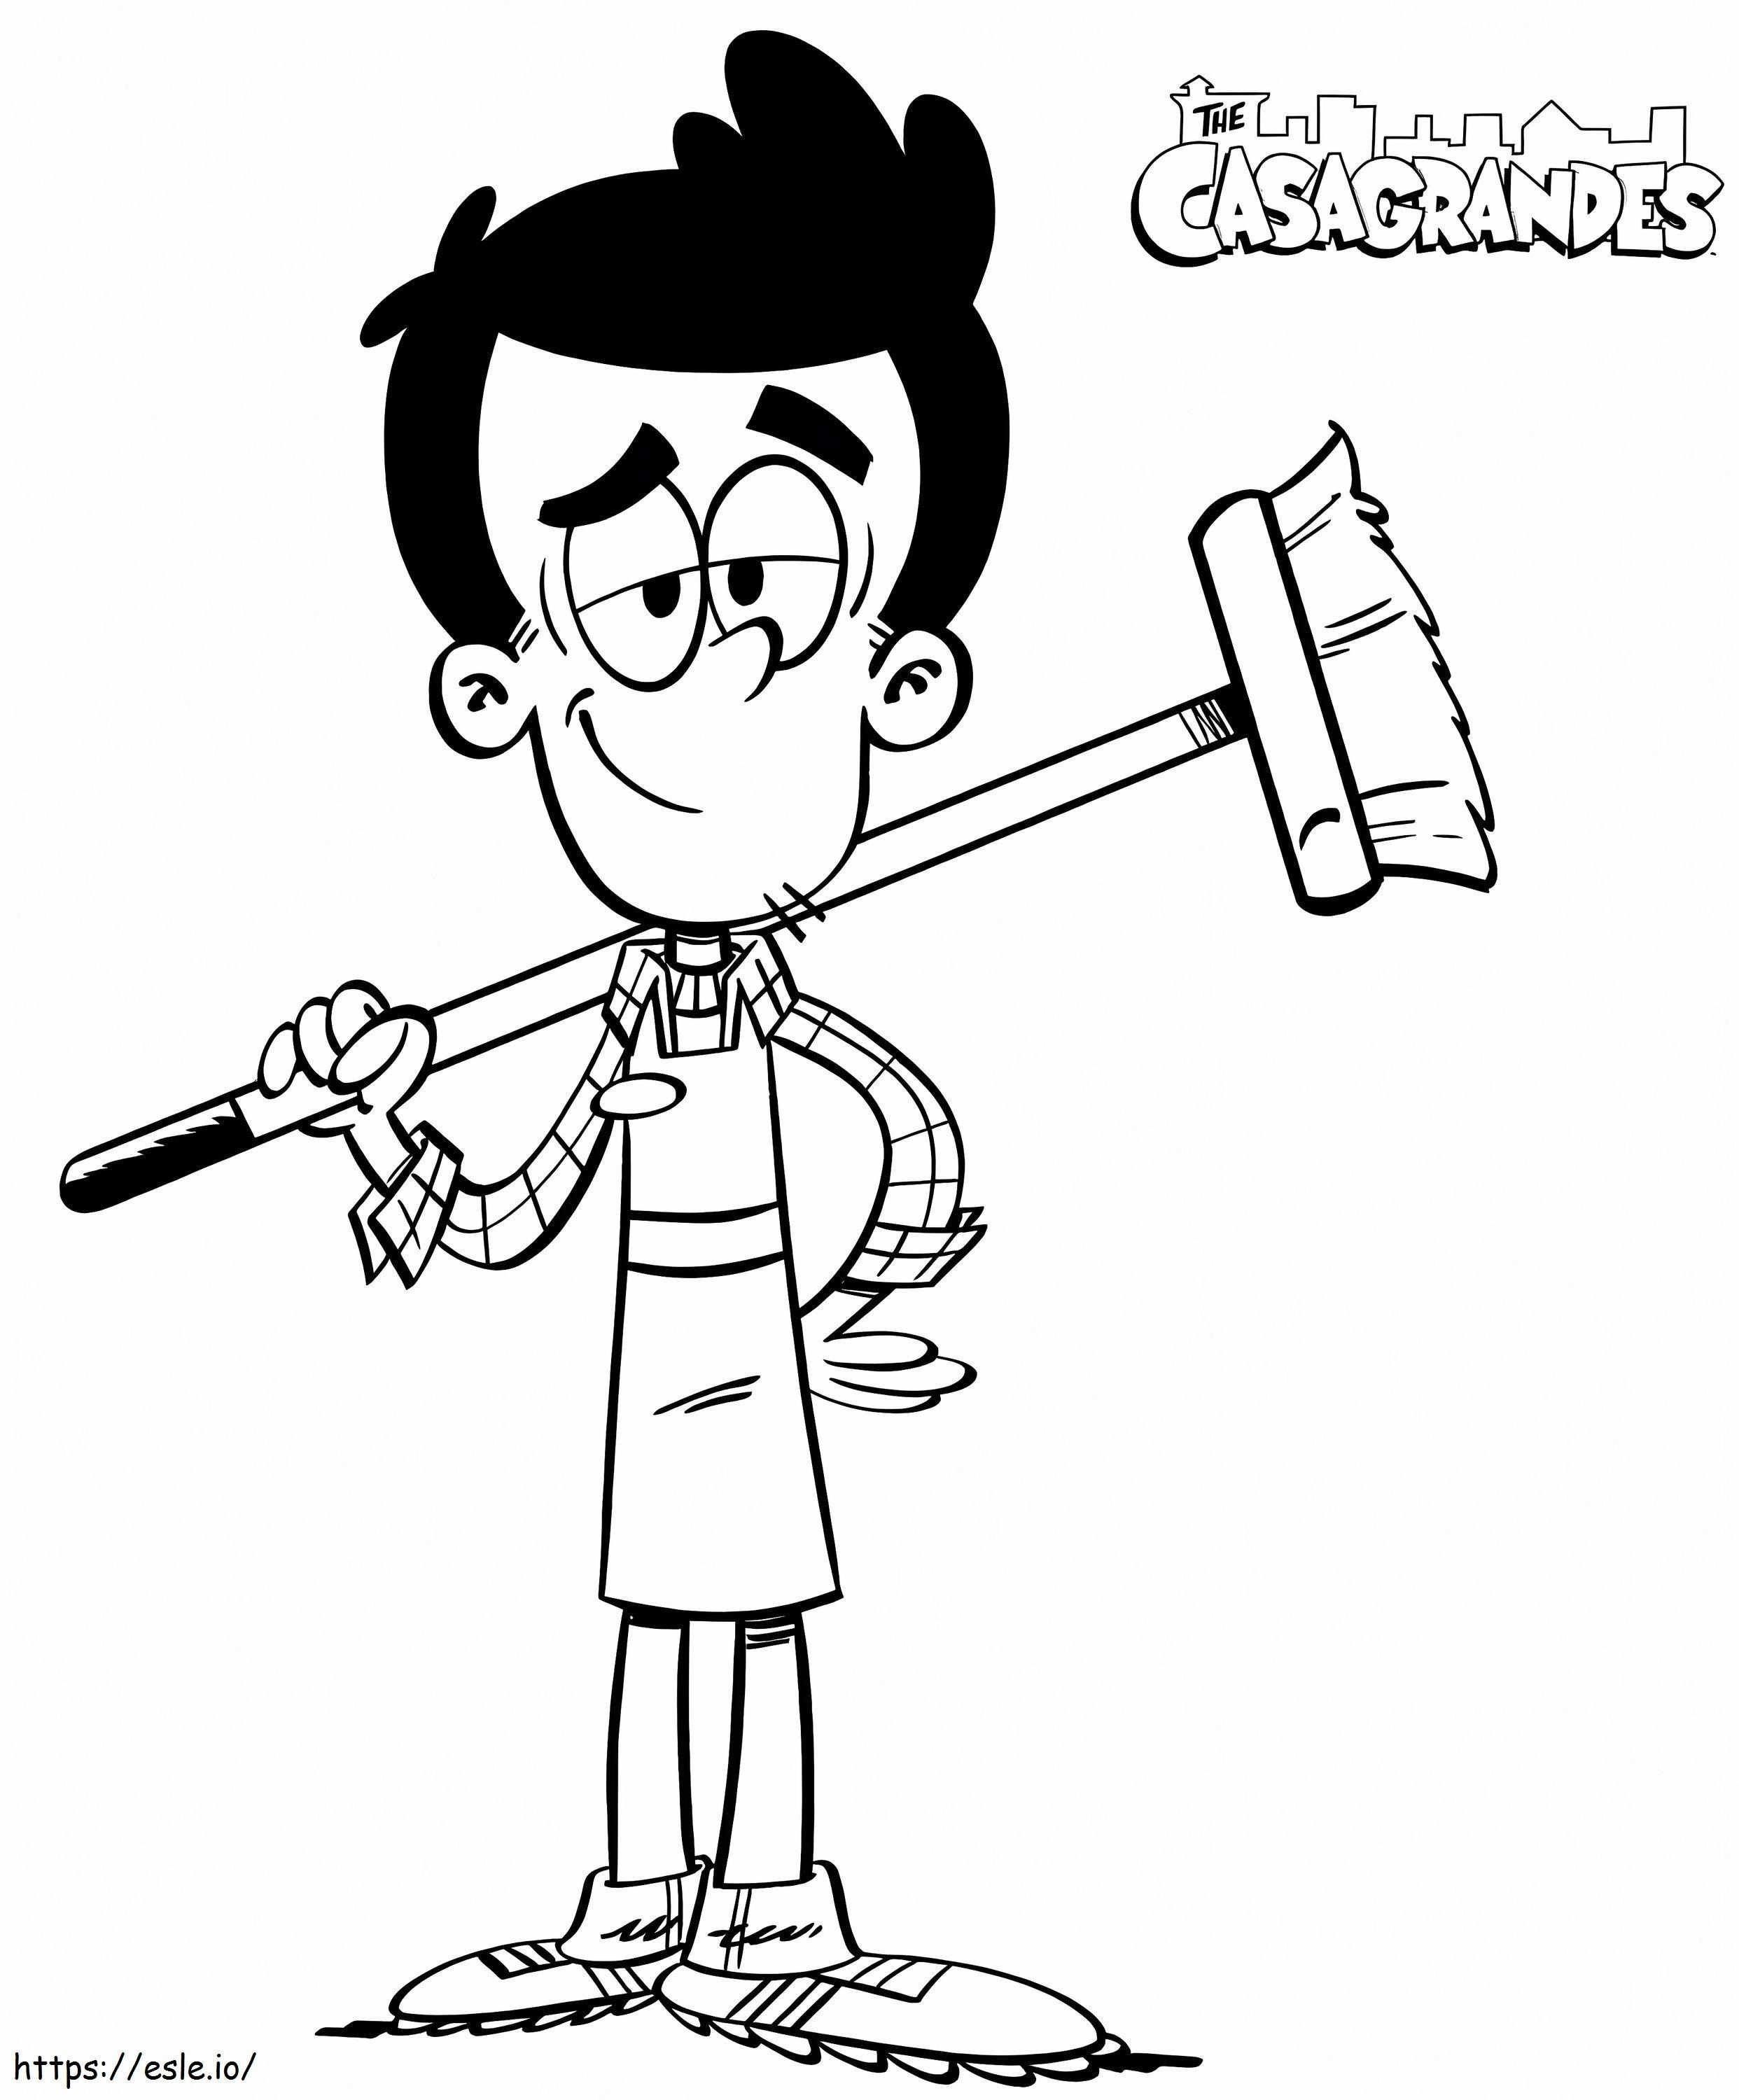 Bobby Santiago From The Casagrandes coloring page